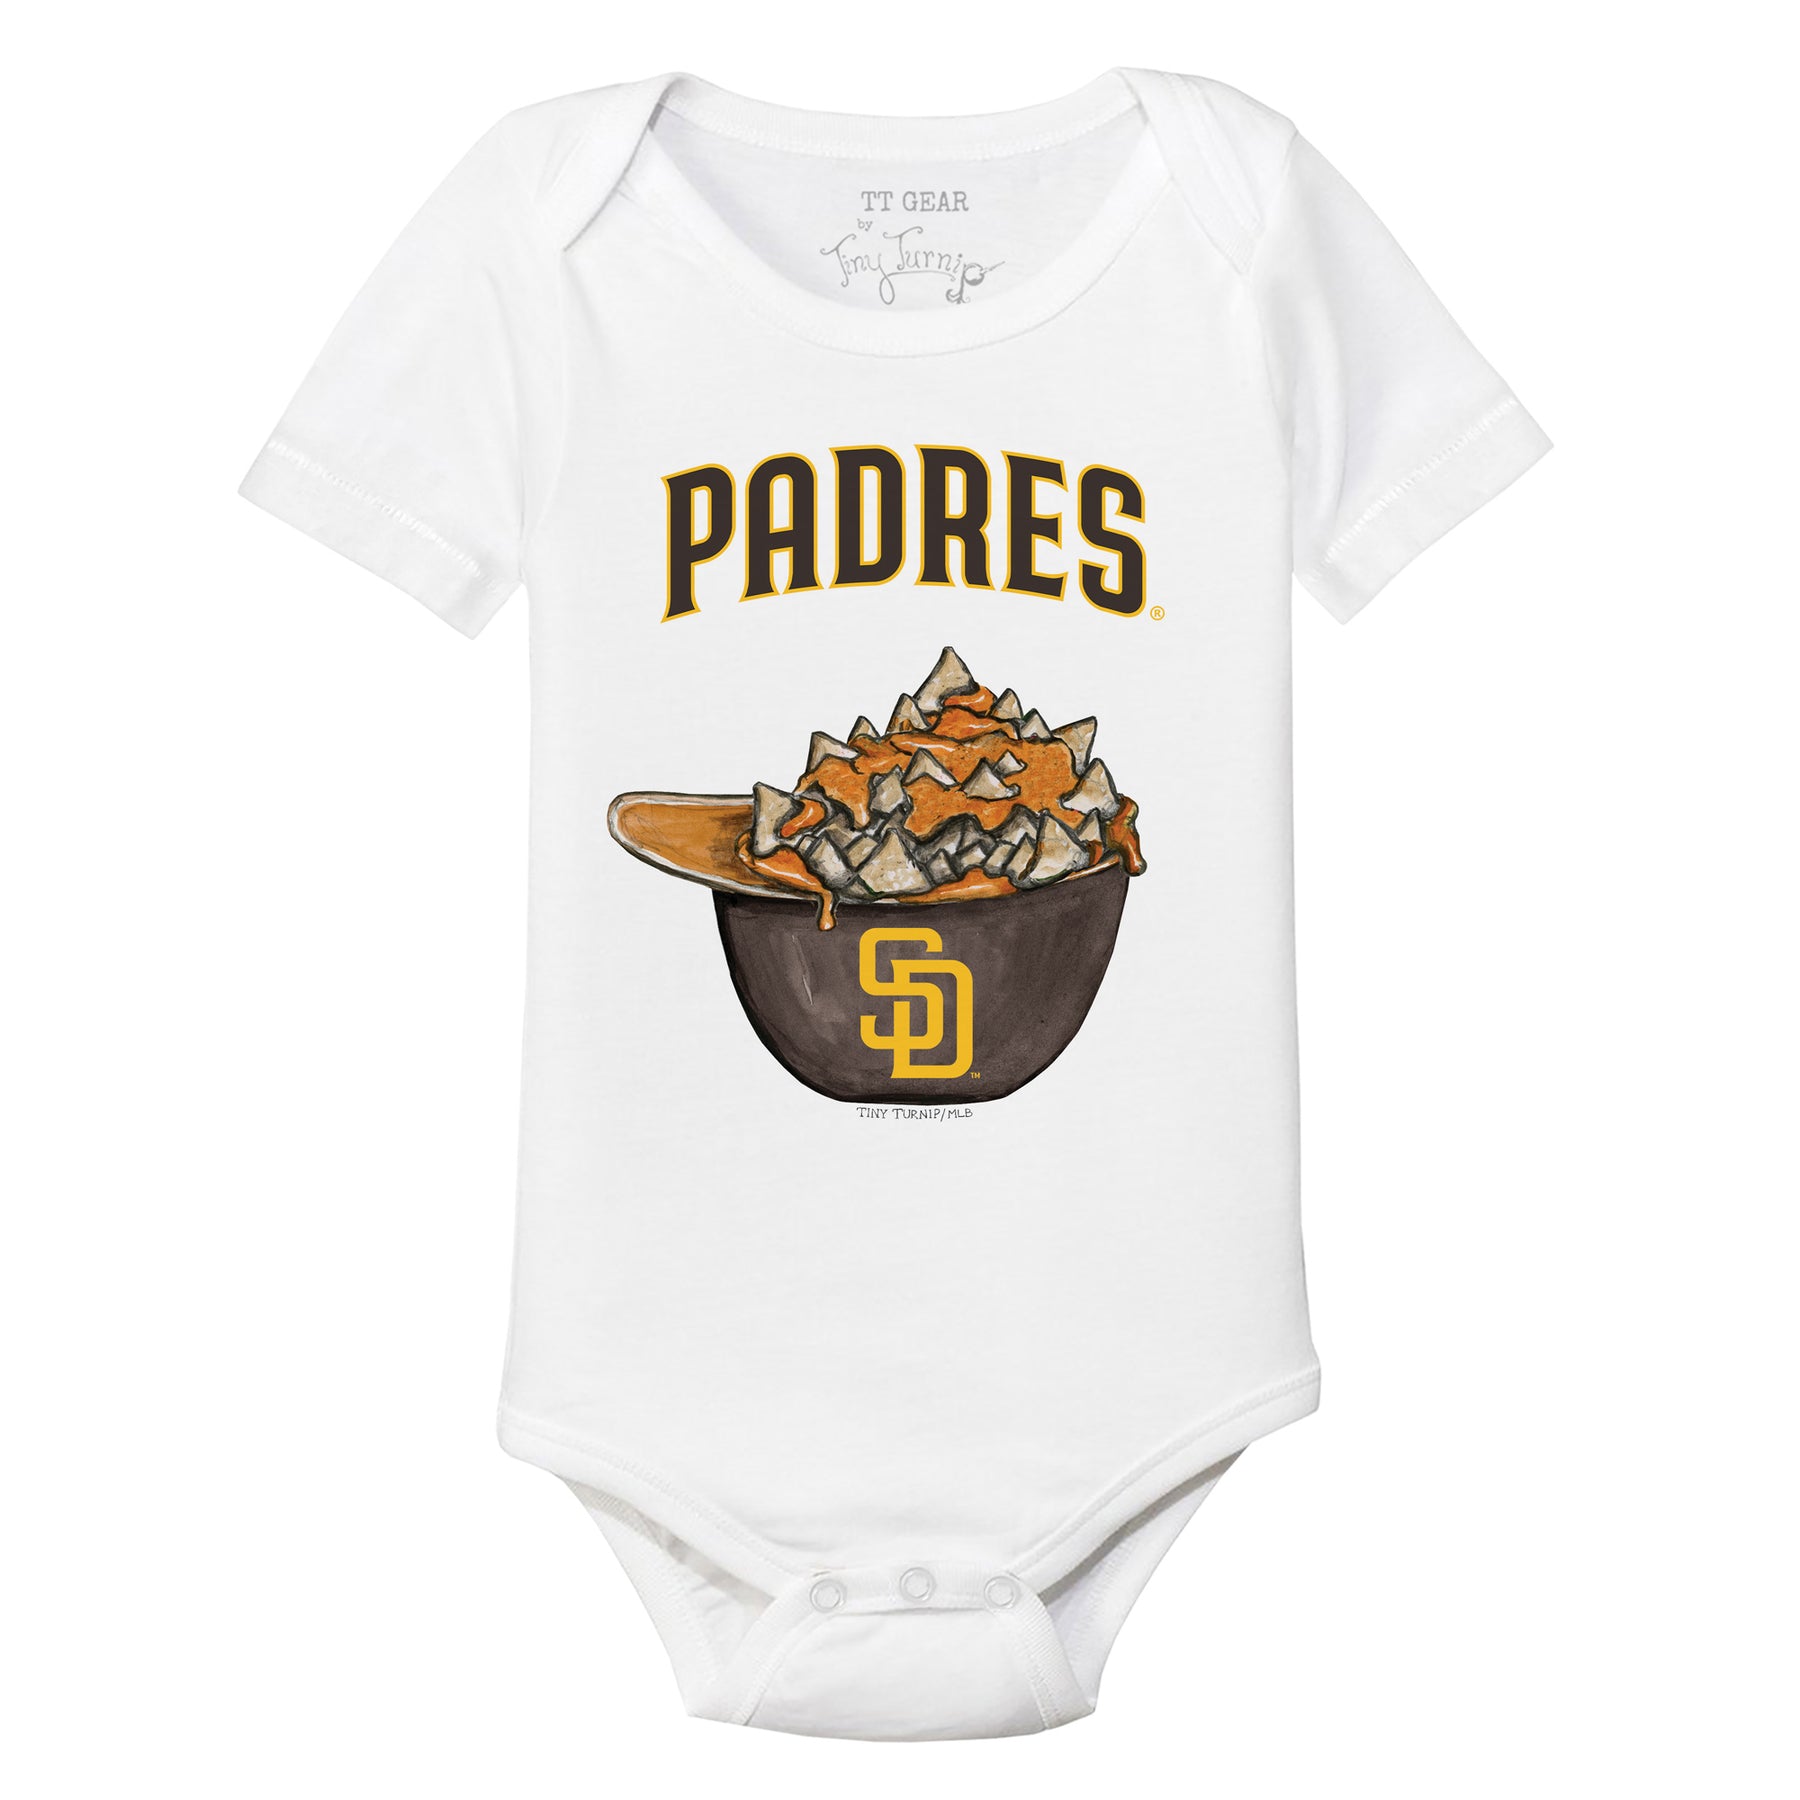 San Diego Padres Baby Apparel, Baby Padres Clothing, Merchandise